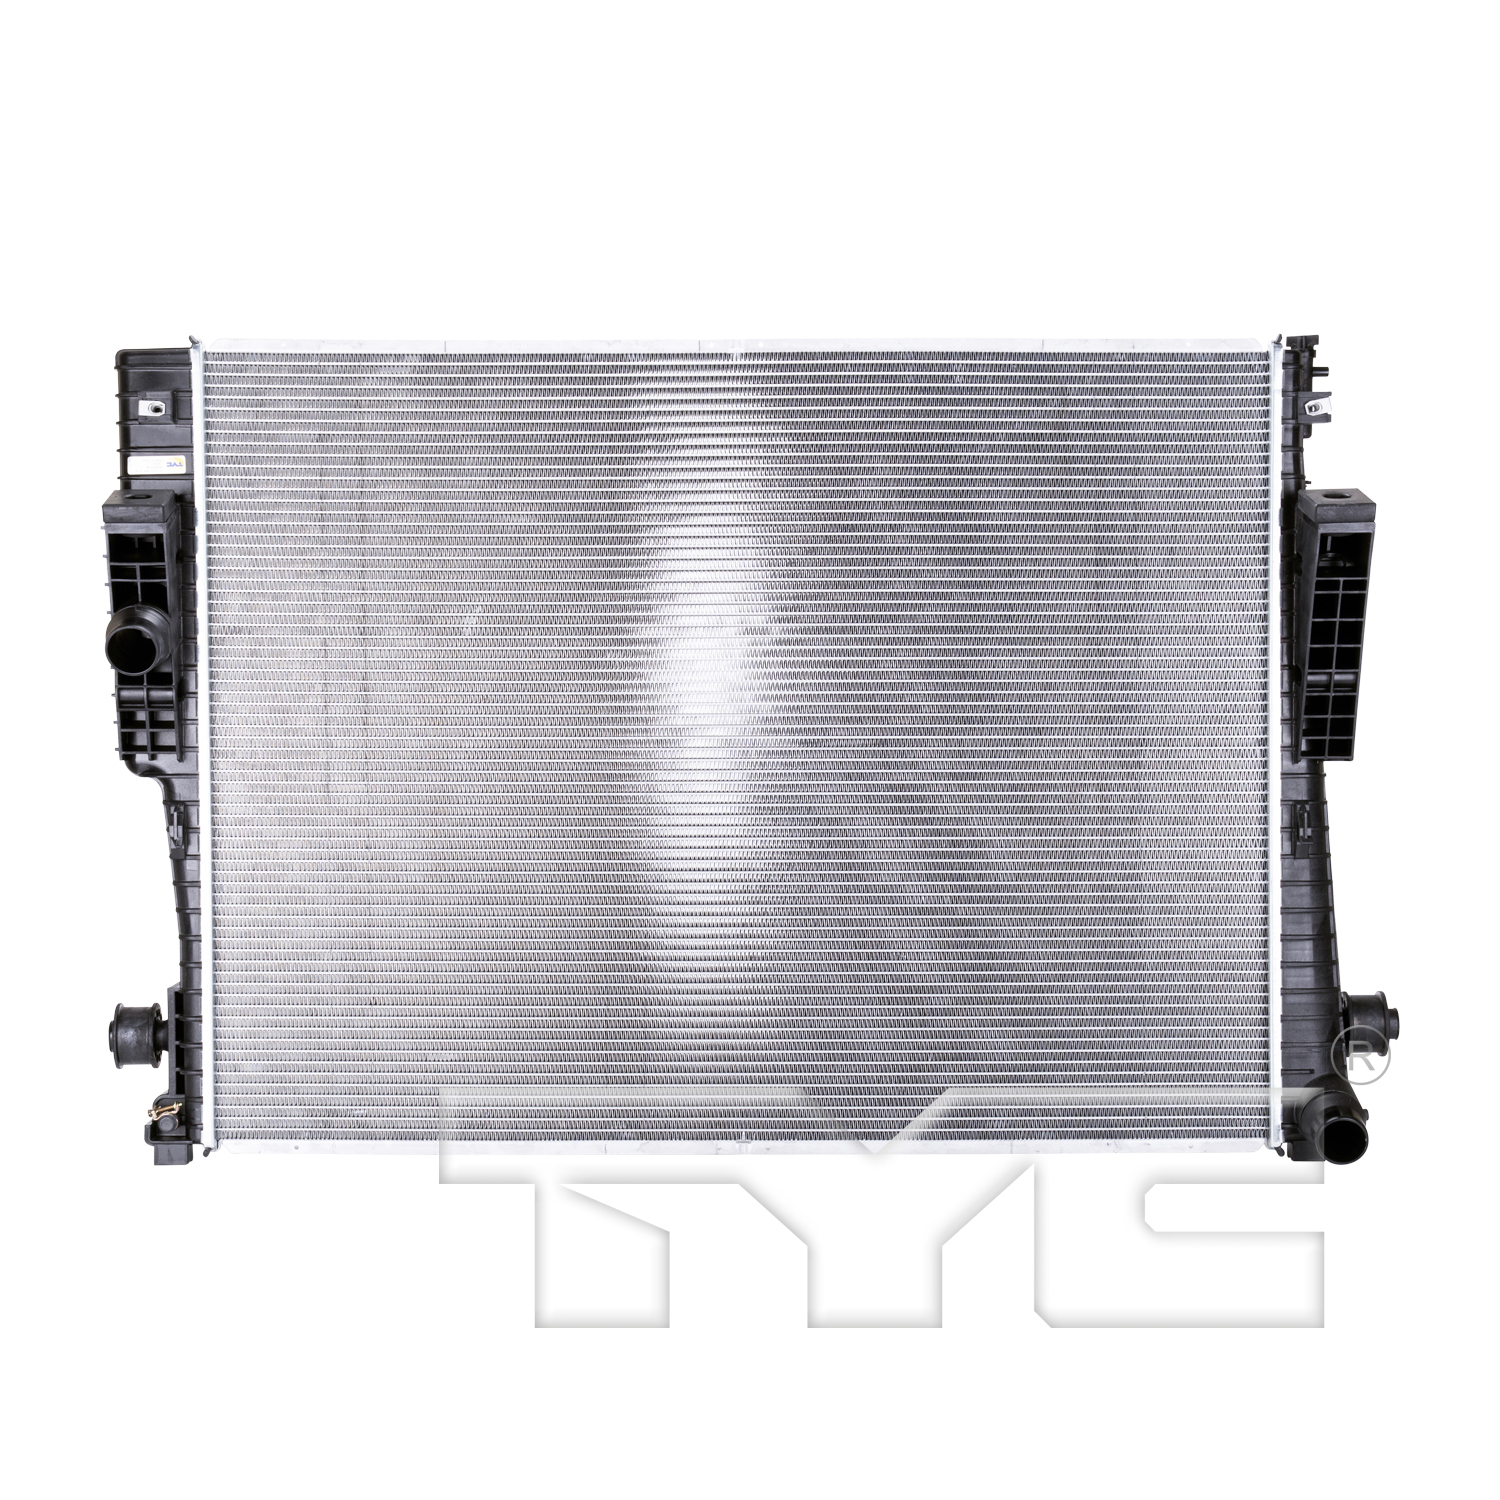 Aftermarket RADIATORS for FORD - F-350 SUPER DUTY, F-350 SUPER DUTY,08-10,Radiator assembly